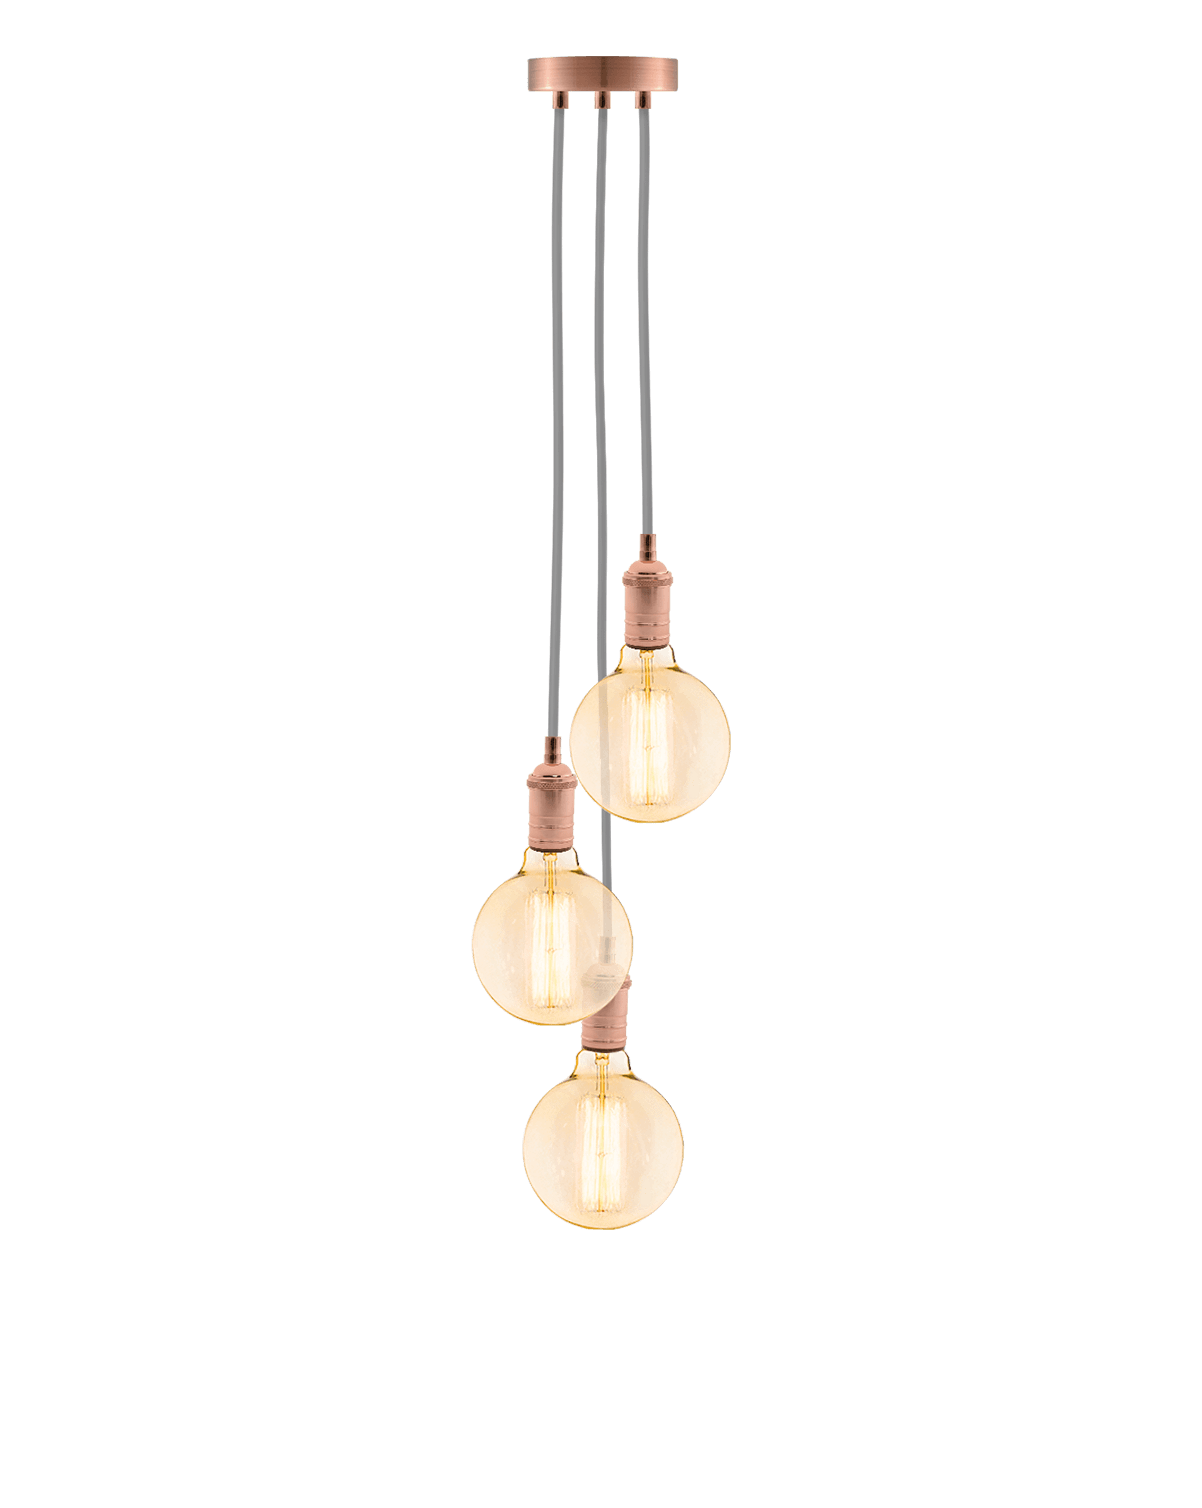 Cluster Chandelier - Staggered: Grey and Copper Hangout Lighting 3 Staggered